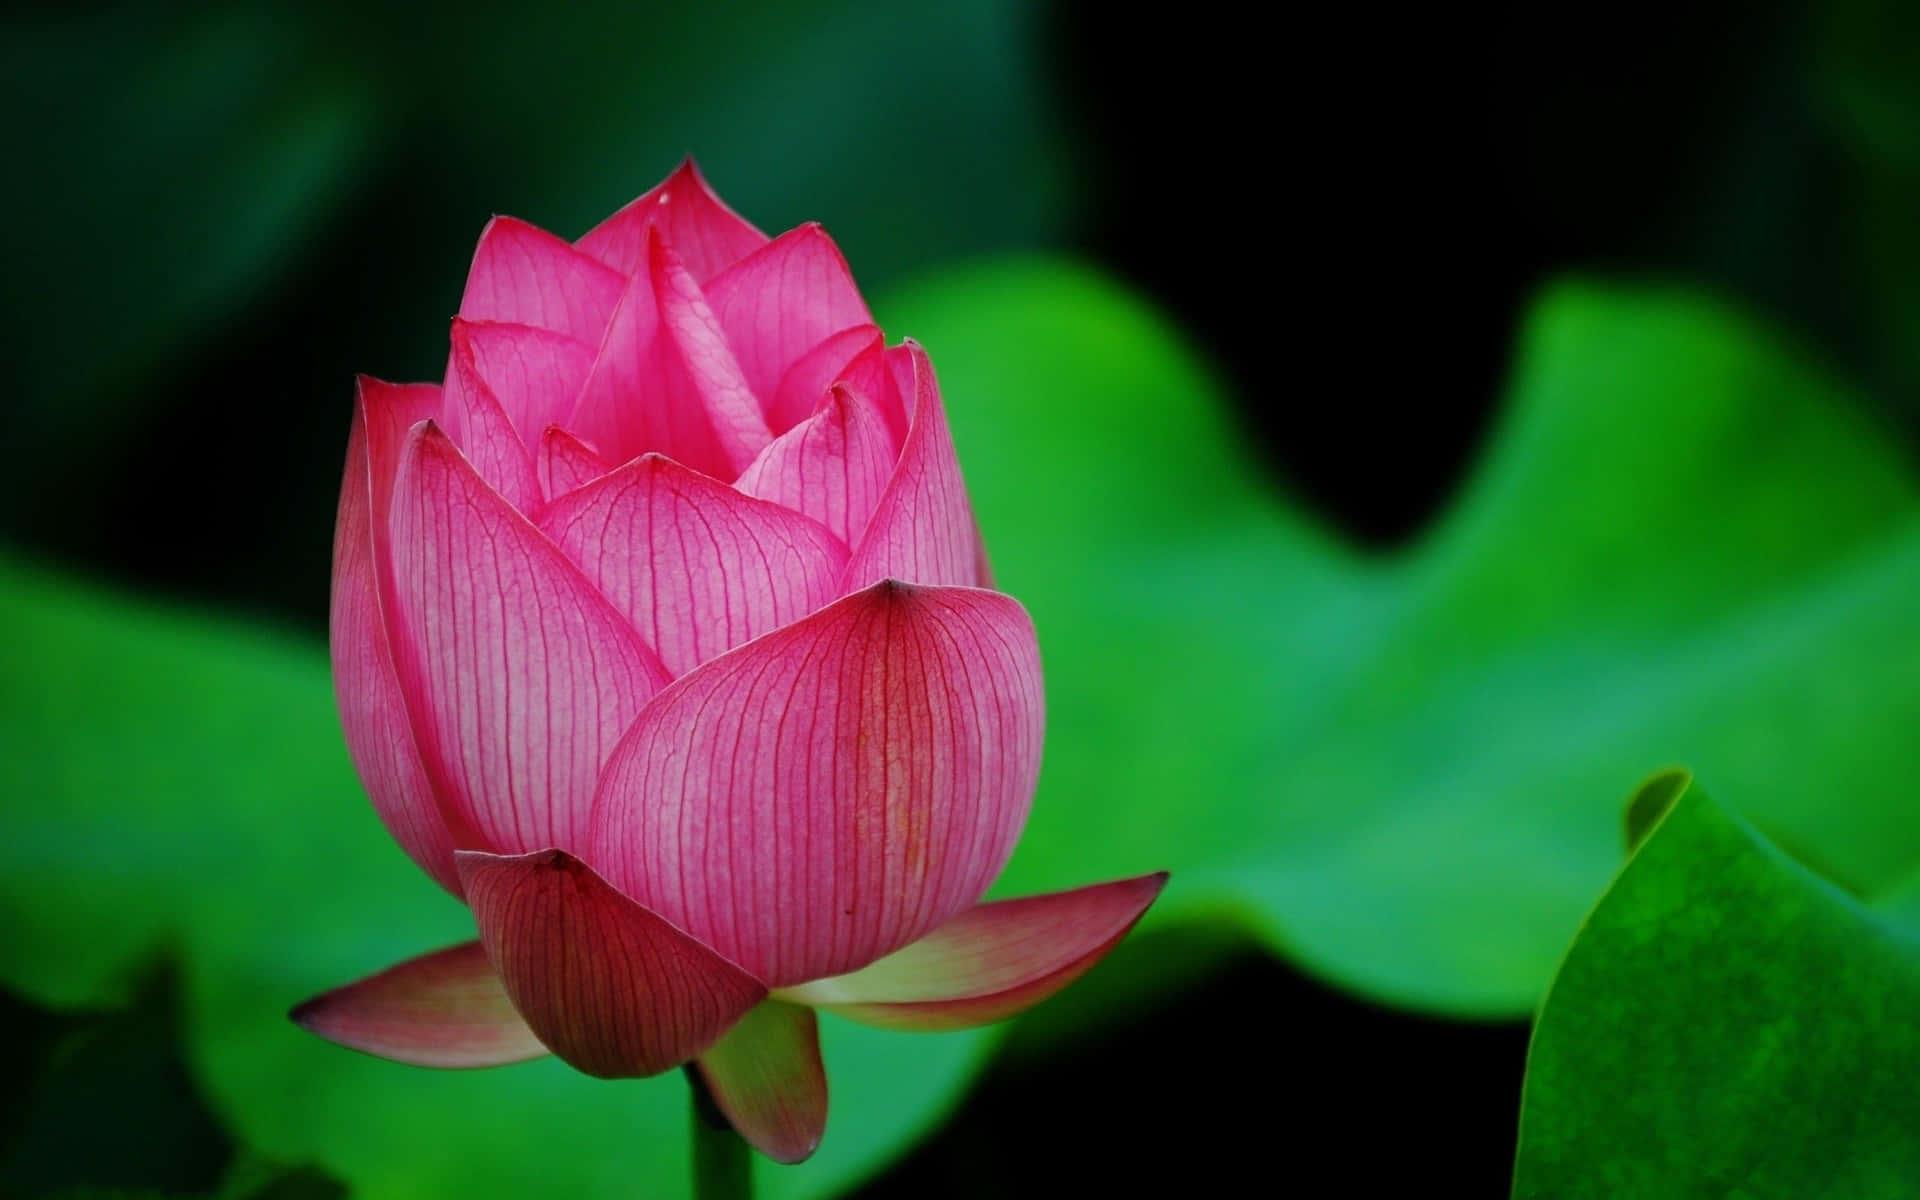 A Fresh Lotus Flower Blooming in the Stream